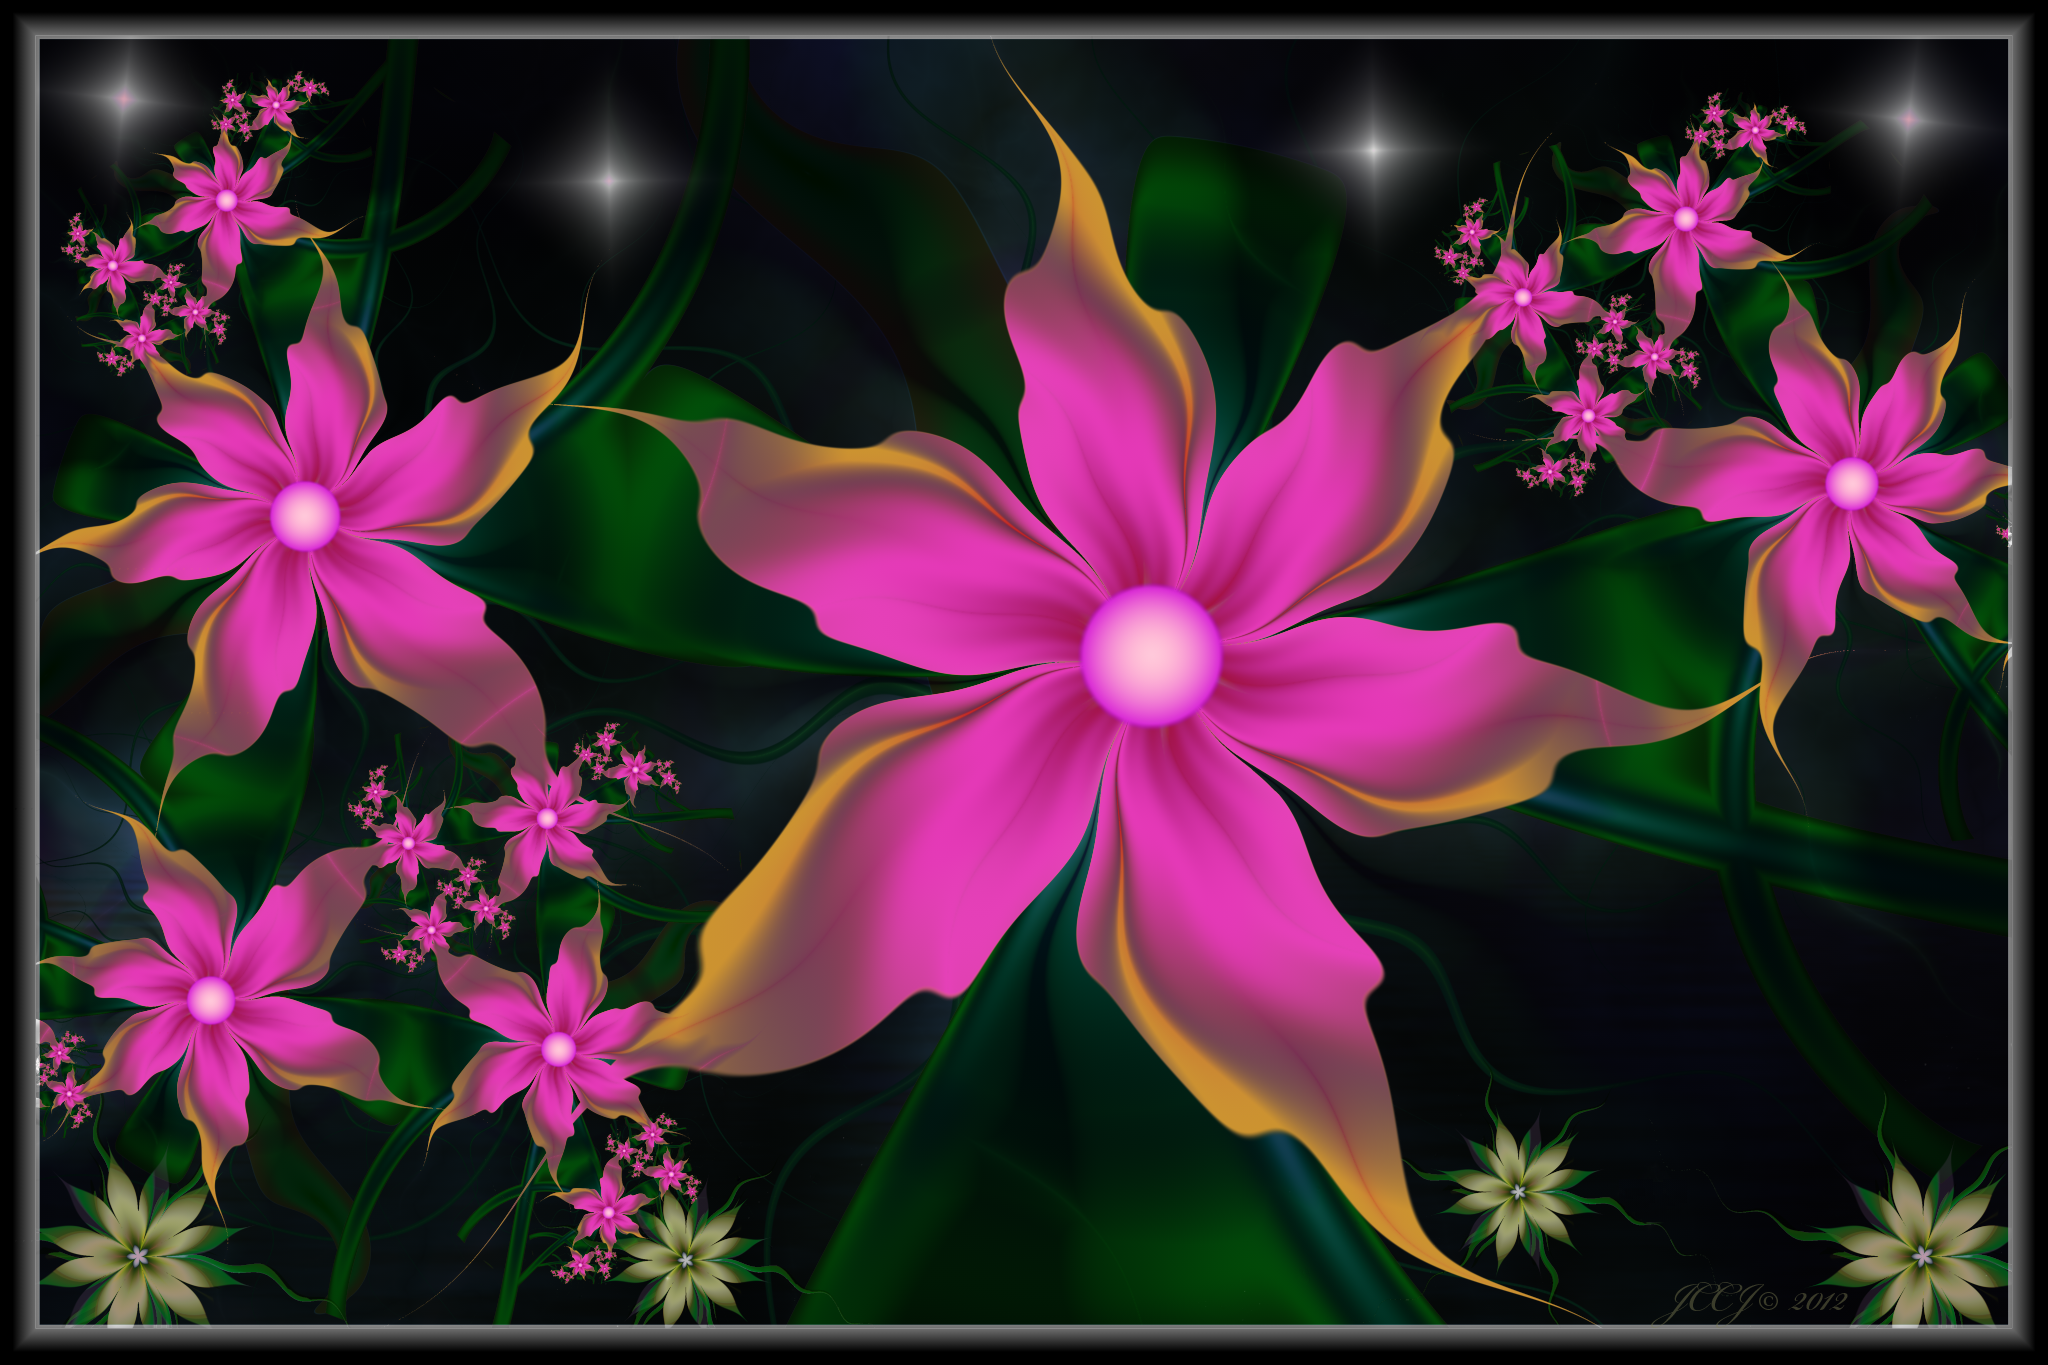 Abstract Pink Flowers by JCCJ756